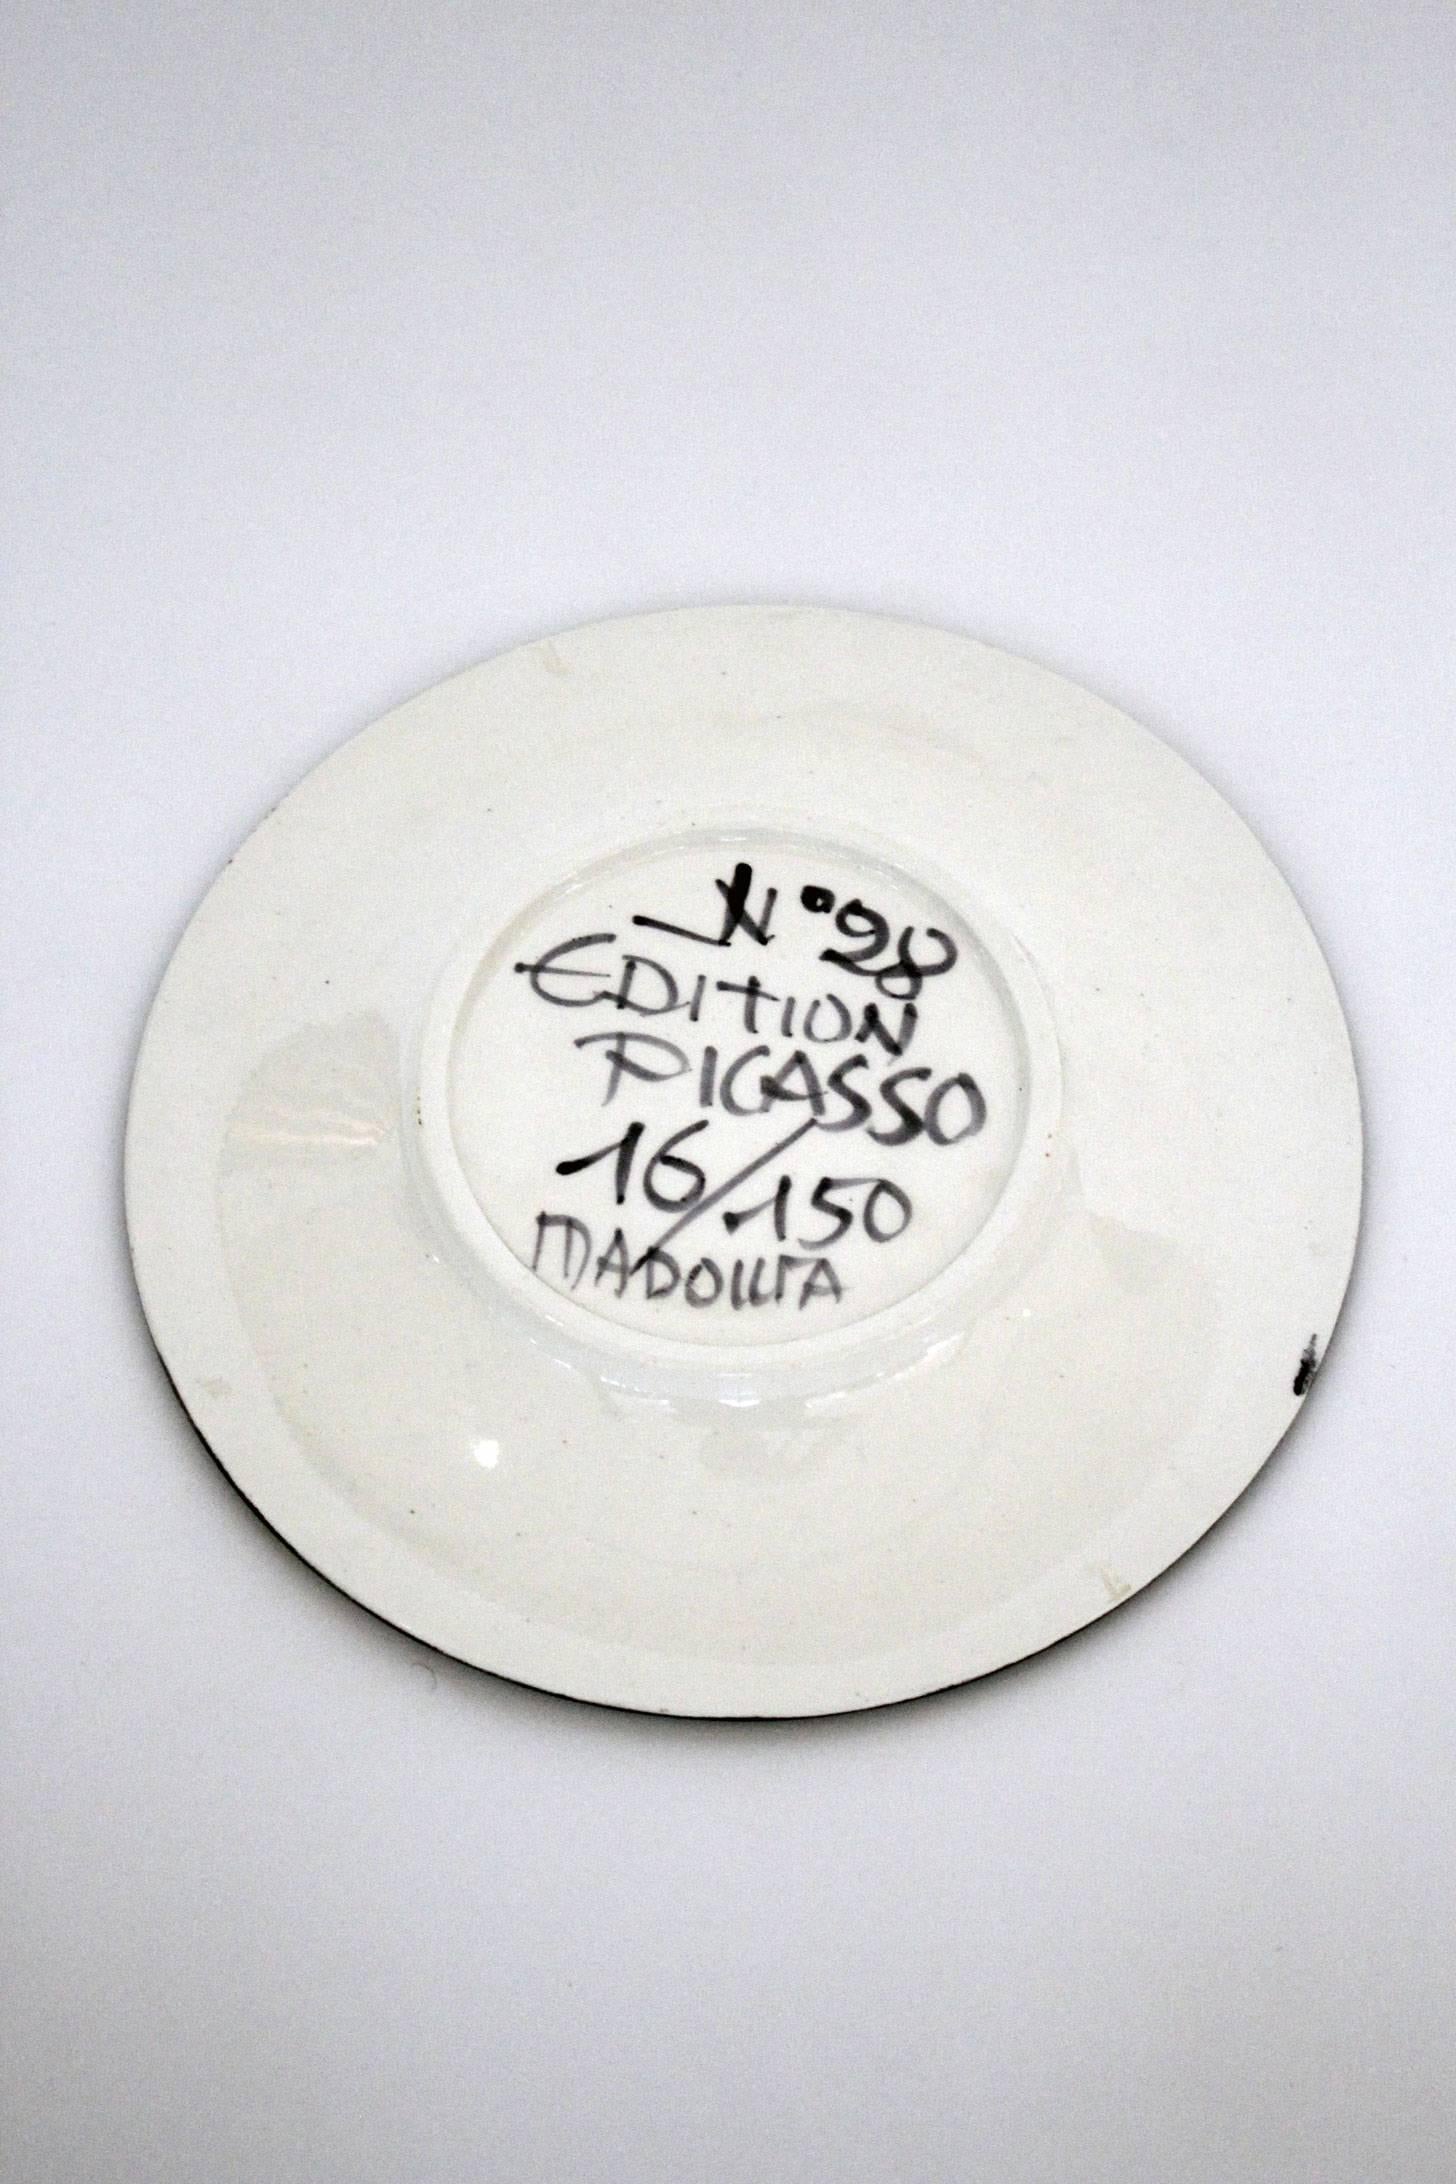 Unglazed Ceramic Plate 'Personagges N. 28' by Pablo Picasso, Numbered 16/150